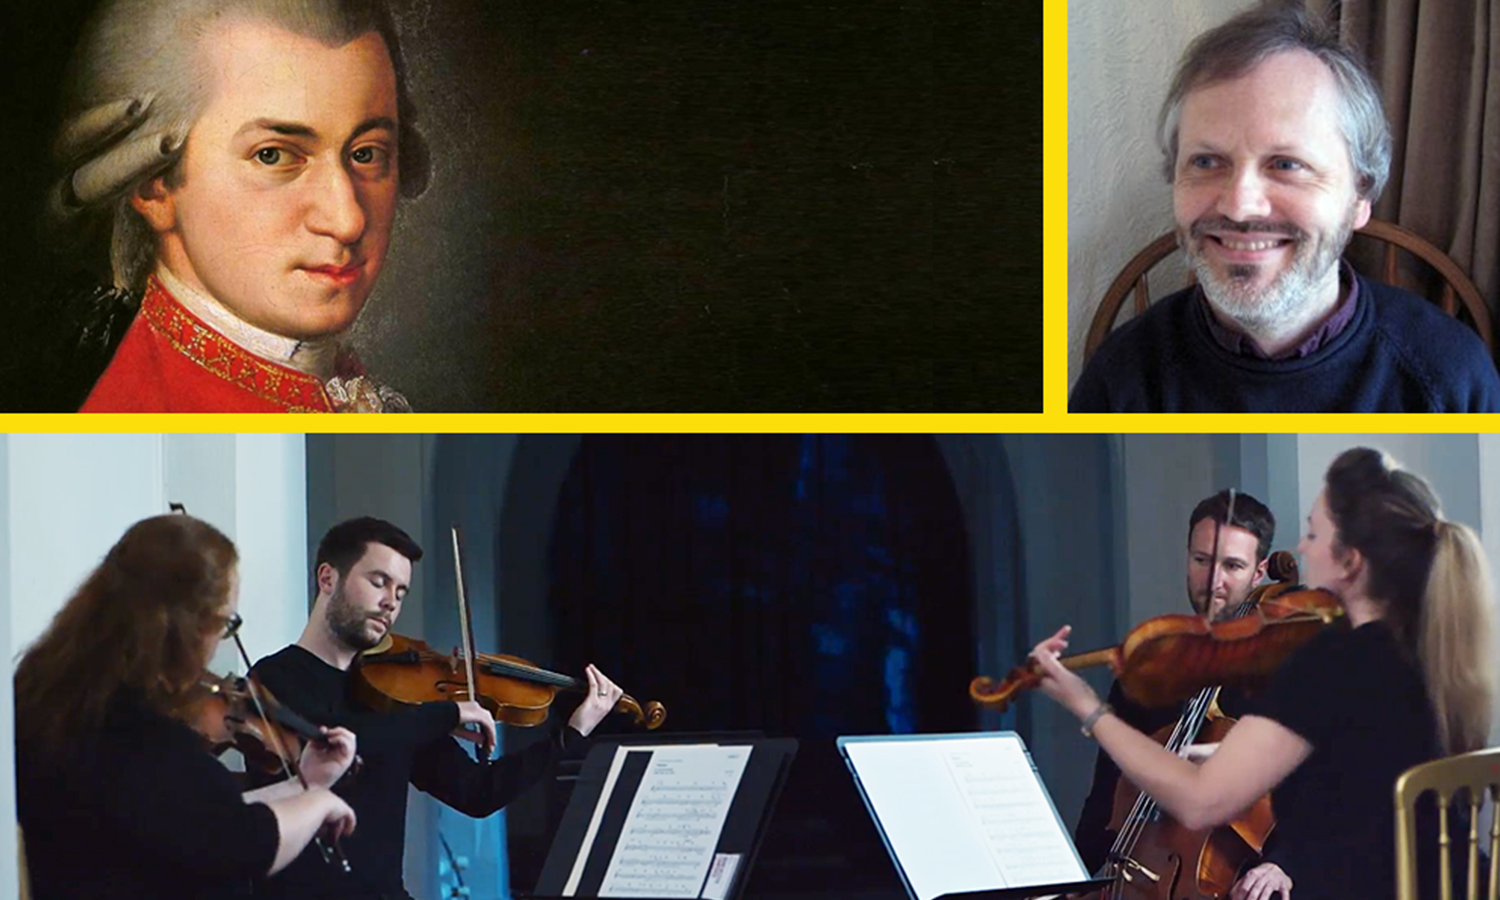 Painting of Mozart, man with grey hair and group of musicians playing string instruments in photo collage separated by yellow line